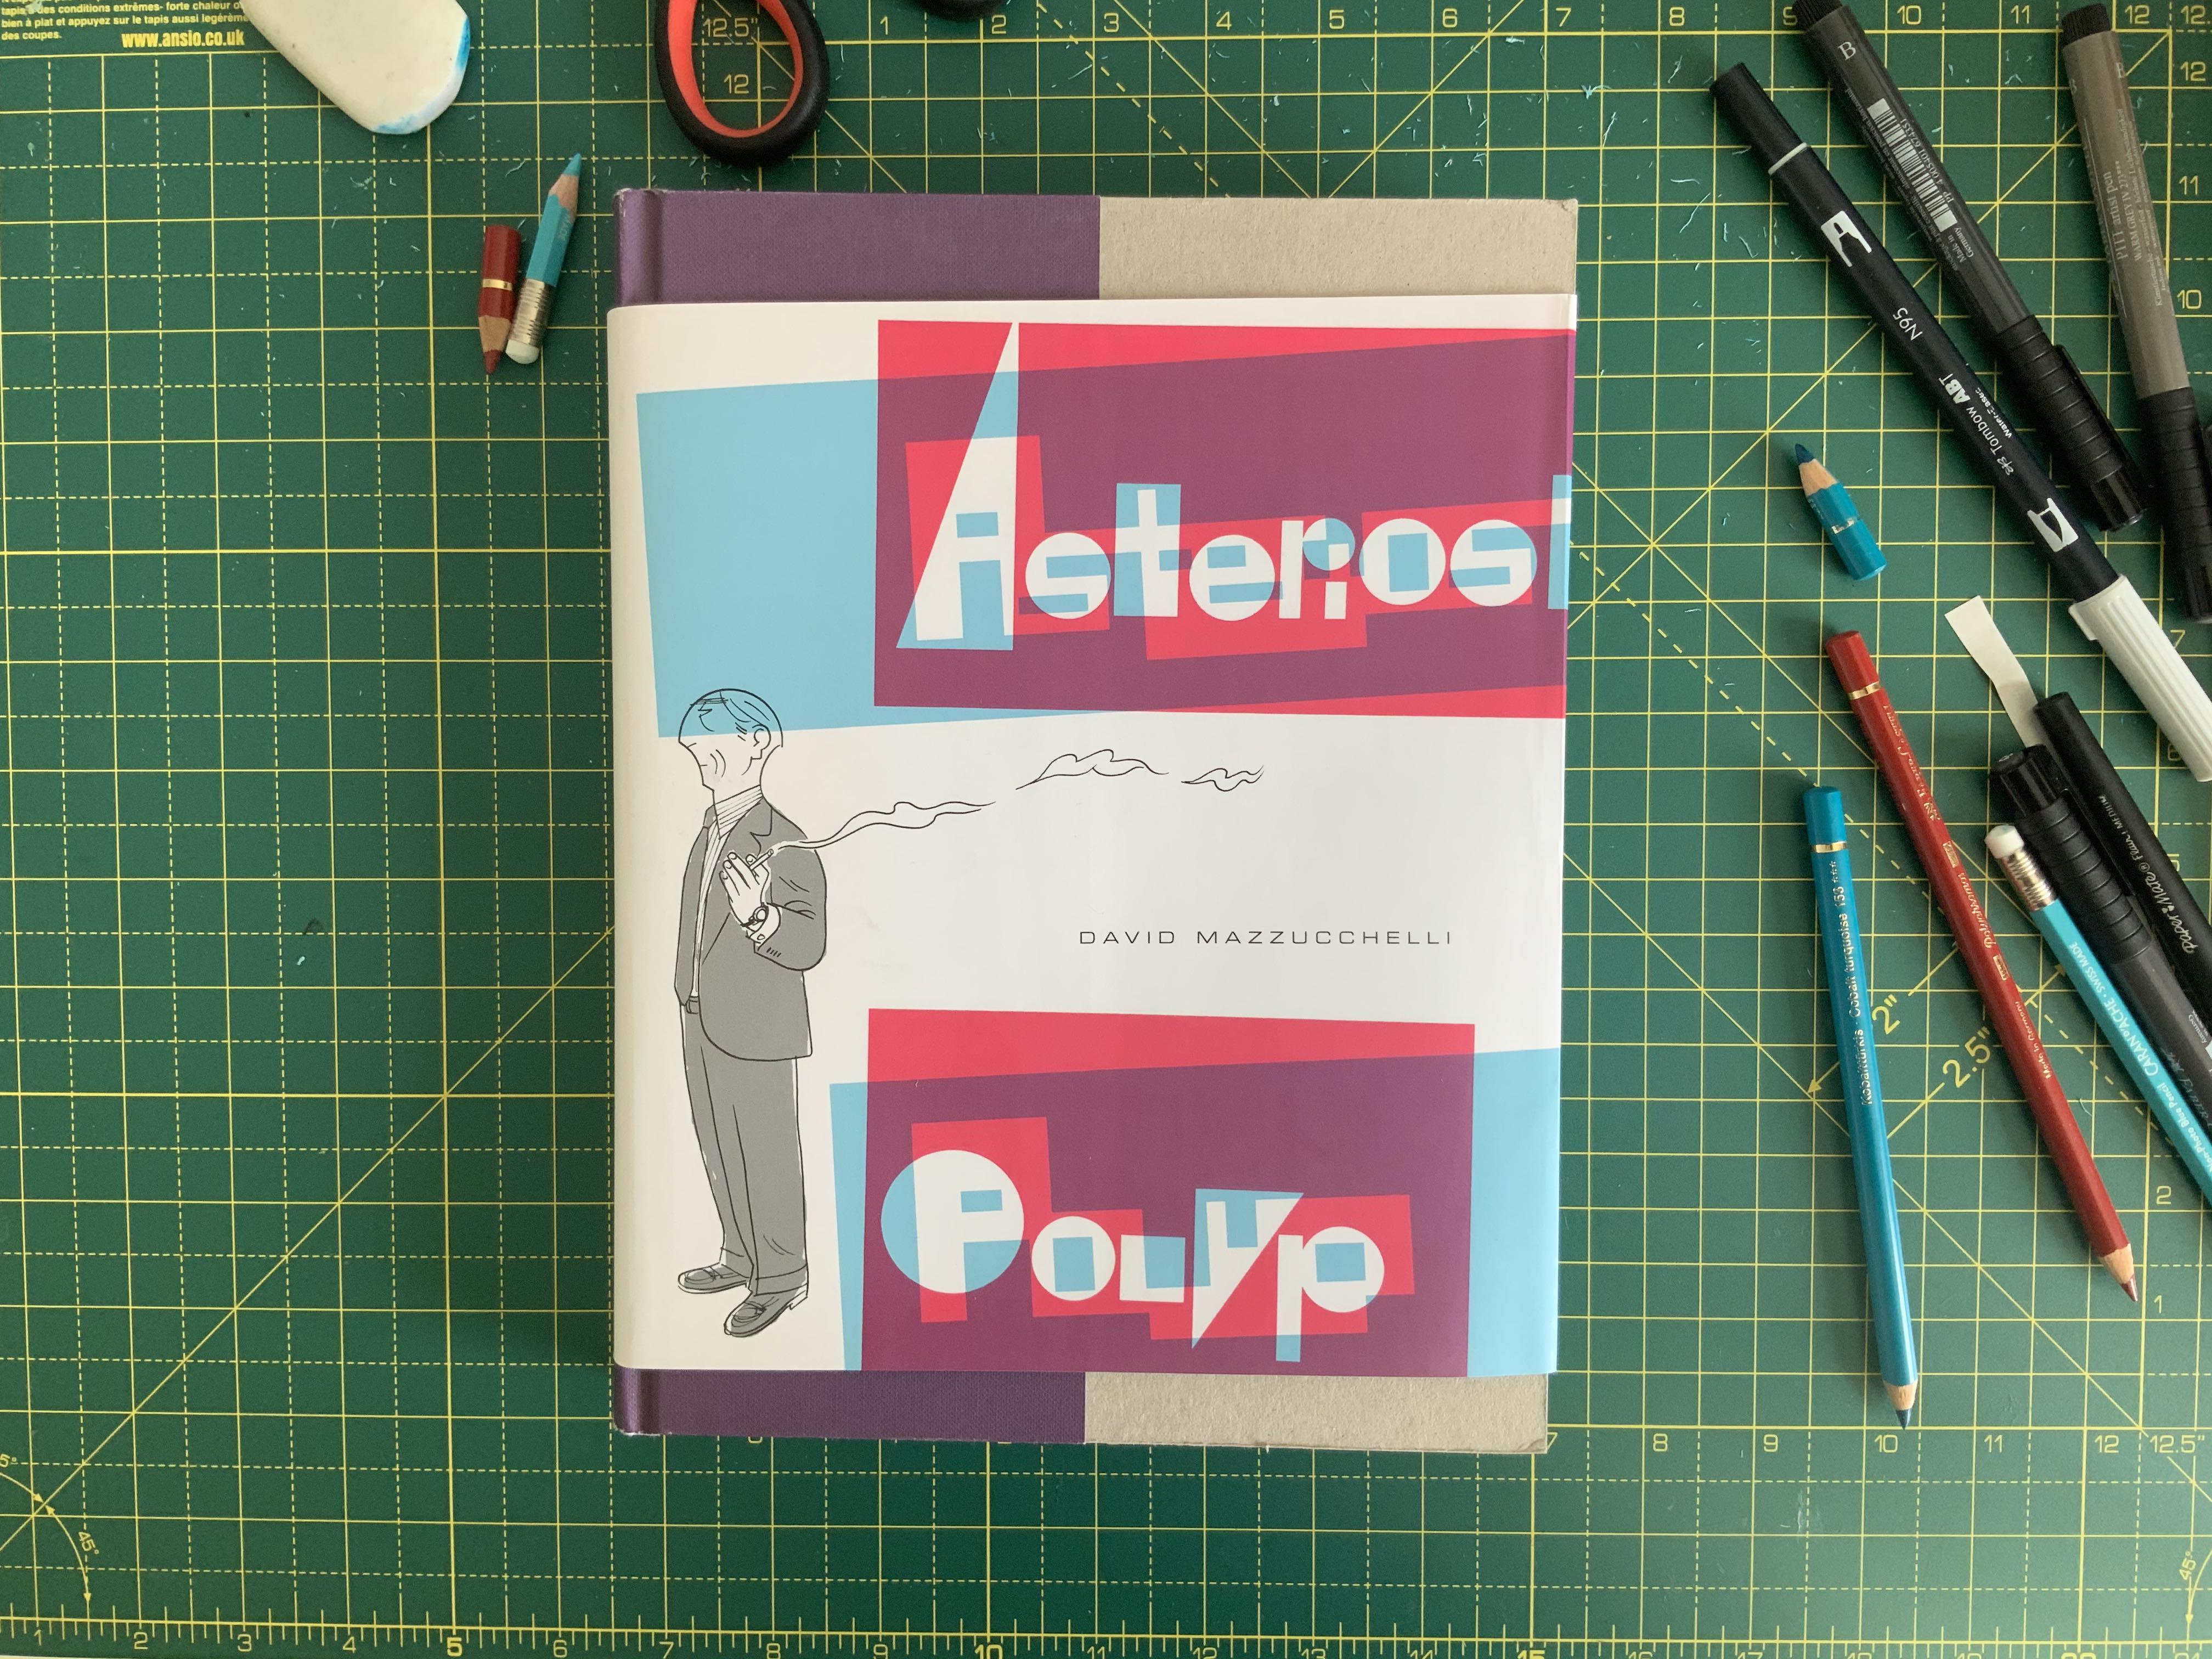 The front cover of <em>Asterios Polyp</em> by David Mazzucchelli 